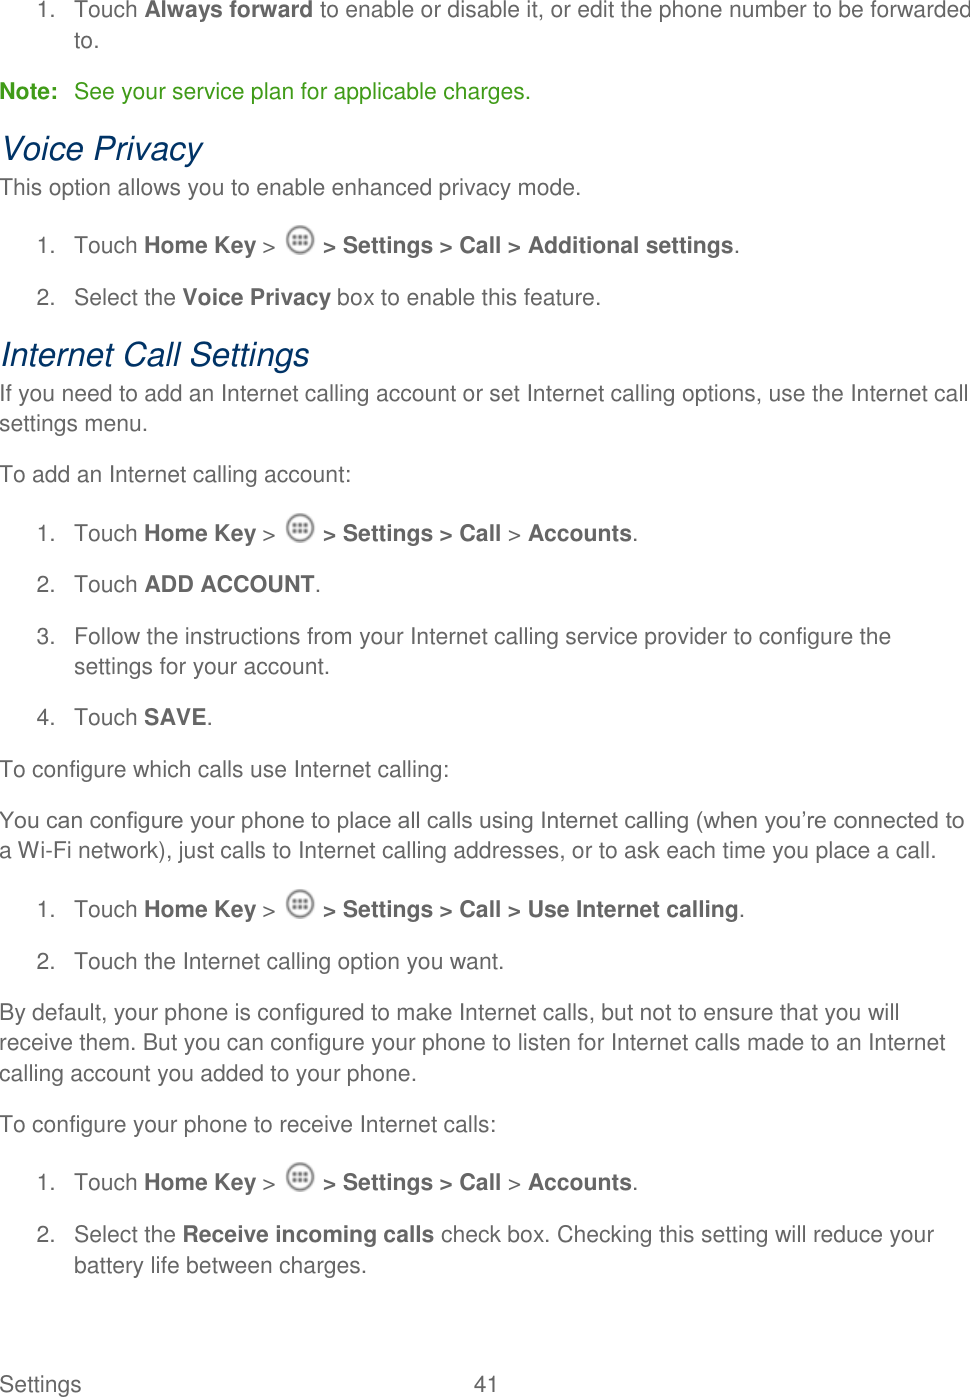 Settings    41 1.  Touch Always forward to enable or disable it, or edit the phone number to be forwarded to. Note:  See your service plan for applicable charges. Voice Privacy This option allows you to enable enhanced privacy mode. 1.  Touch Home Key &gt;   &gt; Settings &gt; Call &gt; Additional settings. 2.  Select the Voice Privacy box to enable this feature. Internet Call Settings If you need to add an Internet calling account or set Internet calling options, use the Internet call settings menu. To add an Internet calling account: 1.  Touch Home Key &gt;   &gt; Settings &gt; Call &gt; Accounts. 2.  Touch ADD ACCOUNT. 3.  Follow the instructions from your Internet calling service provider to configure the settings for your account. 4.  Touch SAVE. To configure which calls use Internet calling: You can configure your phone to place all calls using Internet calling (when you‟re connected to a Wi-Fi network), just calls to Internet calling addresses, or to ask each time you place a call. 1.  Touch Home Key &gt;   &gt; Settings &gt; Call &gt; Use Internet calling. 2.  Touch the Internet calling option you want. By default, your phone is configured to make Internet calls, but not to ensure that you will receive them. But you can configure your phone to listen for Internet calls made to an Internet calling account you added to your phone. To configure your phone to receive Internet calls: 1.  Touch Home Key &gt;   &gt; Settings &gt; Call &gt; Accounts. 2.  Select the Receive incoming calls check box. Checking this setting will reduce your battery life between charges. 